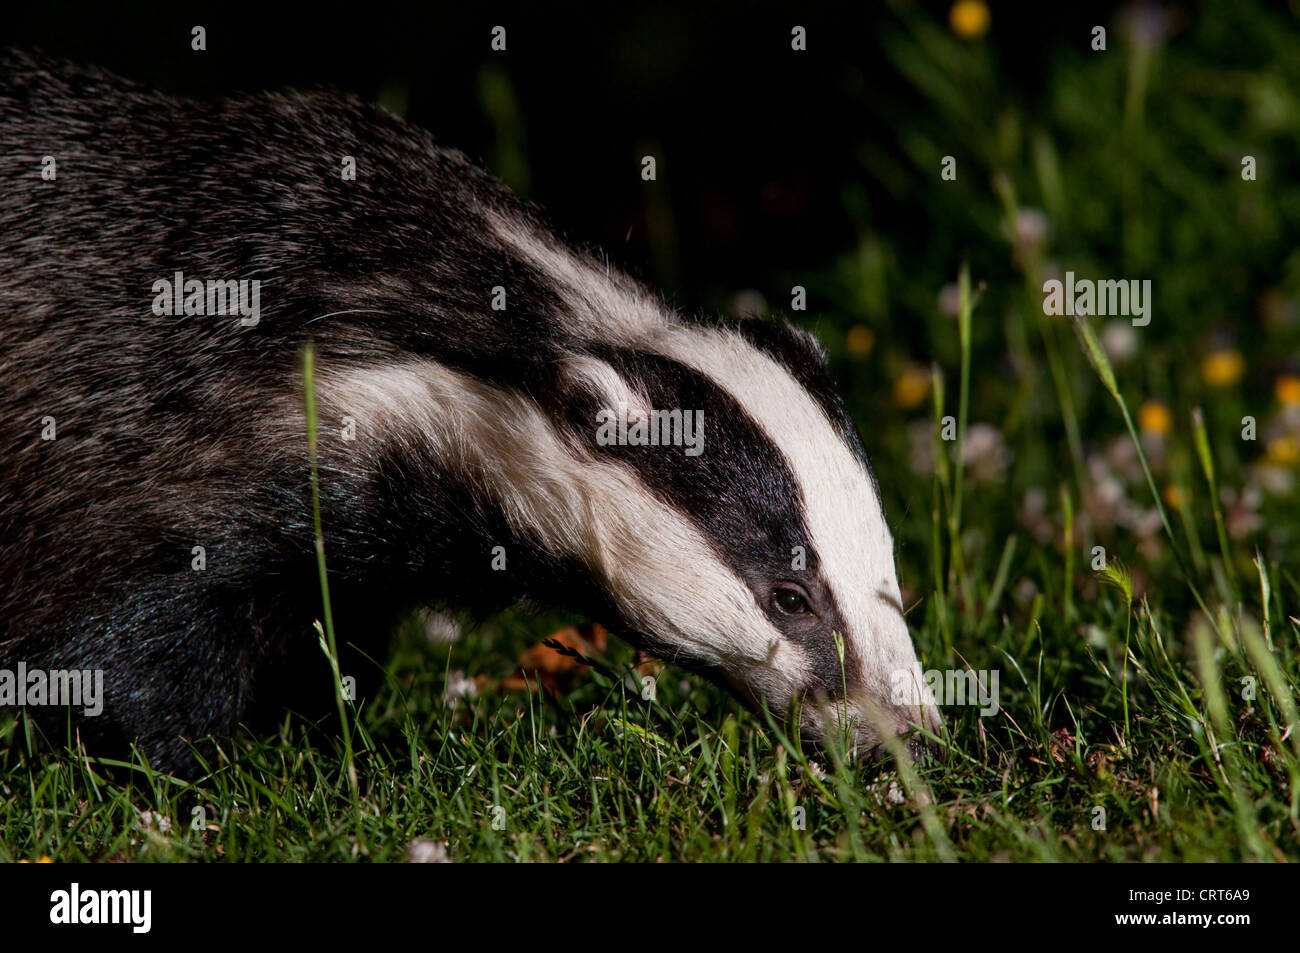 Head and shoulders of an adult eurasian badger (Meles meles) as it hunts for food on grass Stock Photo